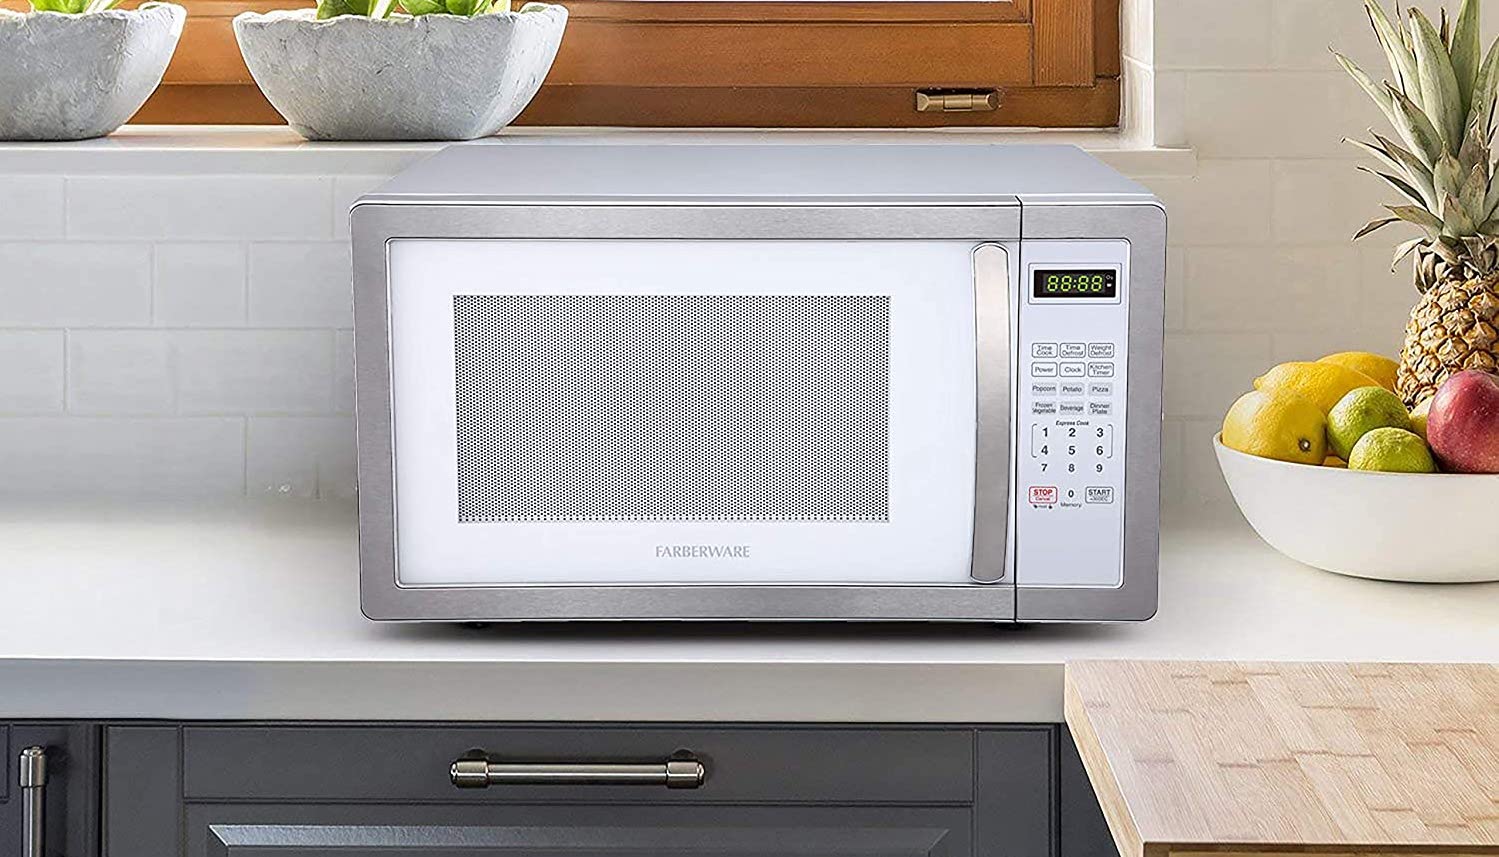 Which Brand Is Best For Convection Microwave Oven?